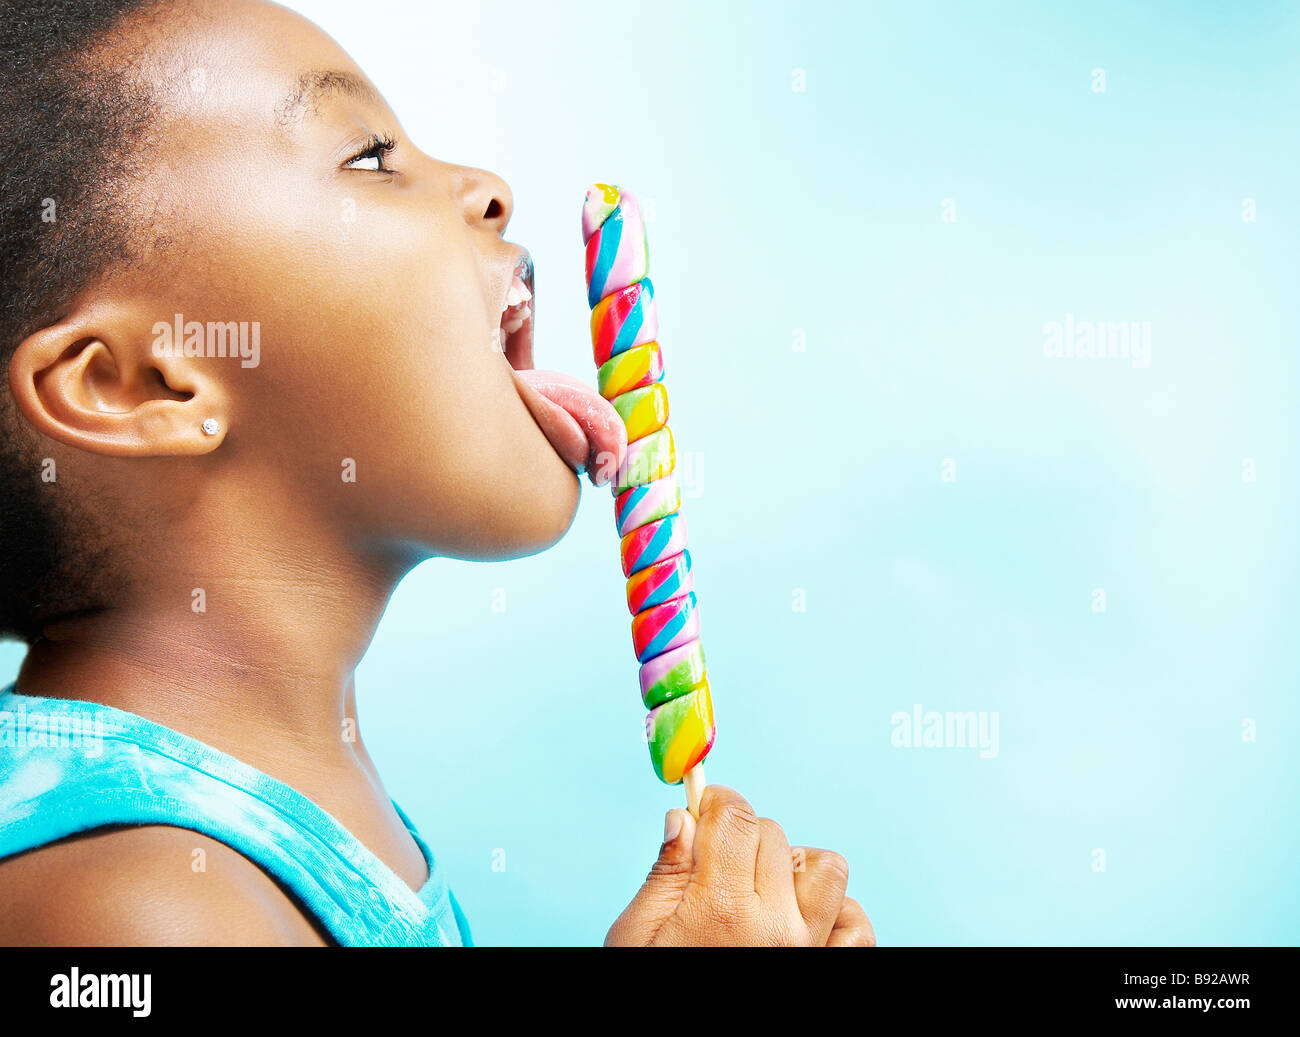 Side view of young girl licking lollipop Stock Photo